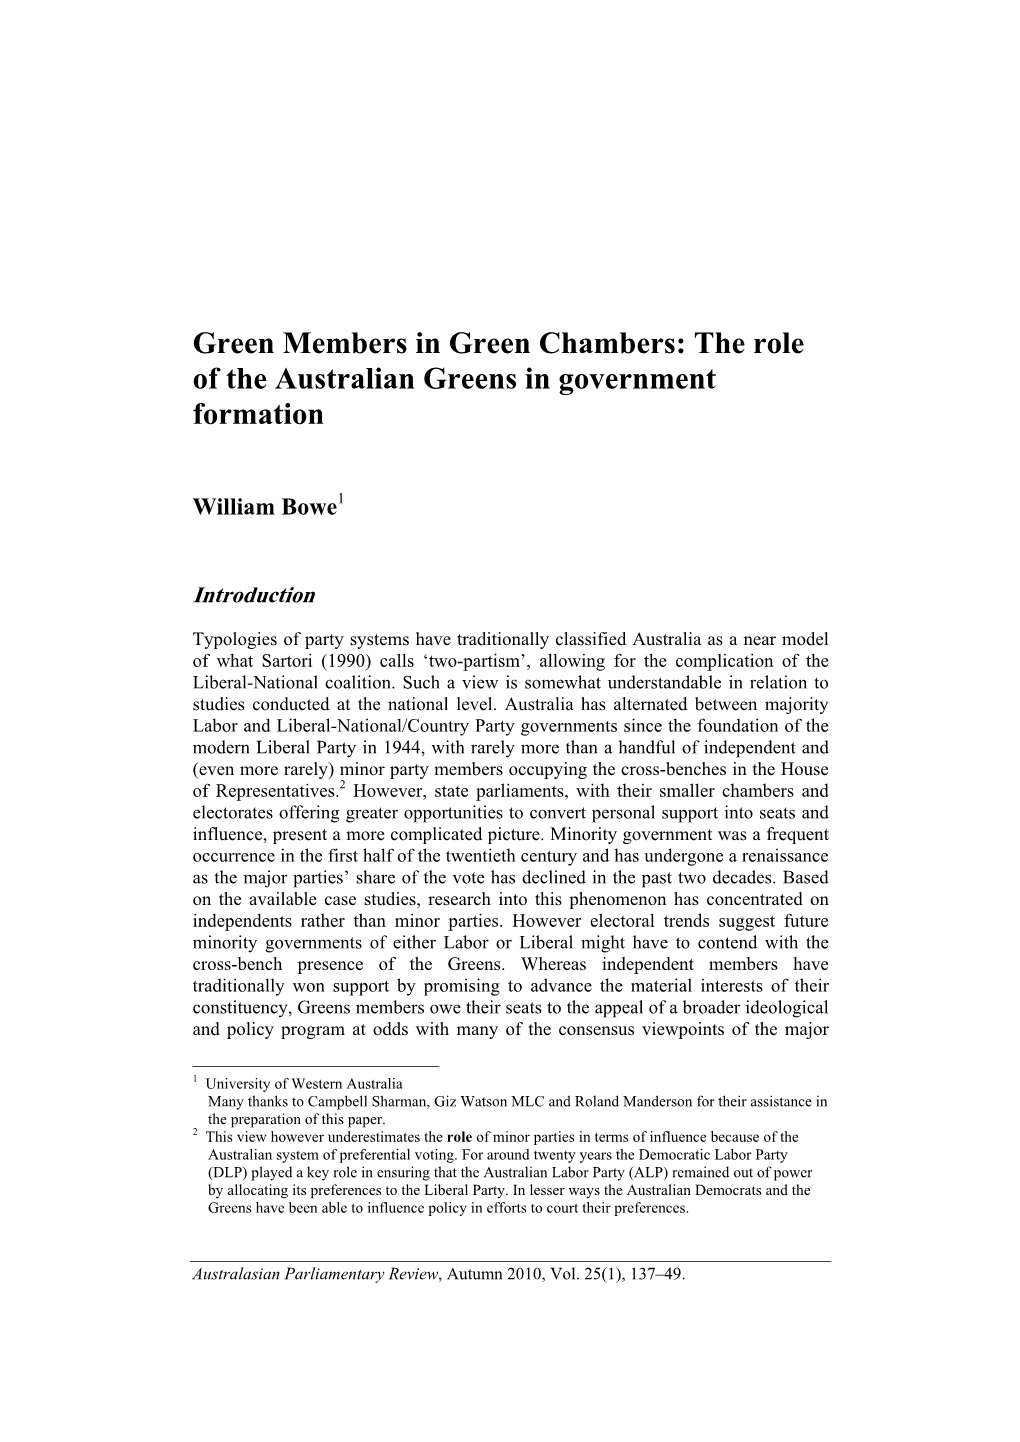 The Role of the Australian Greens in Government Formation